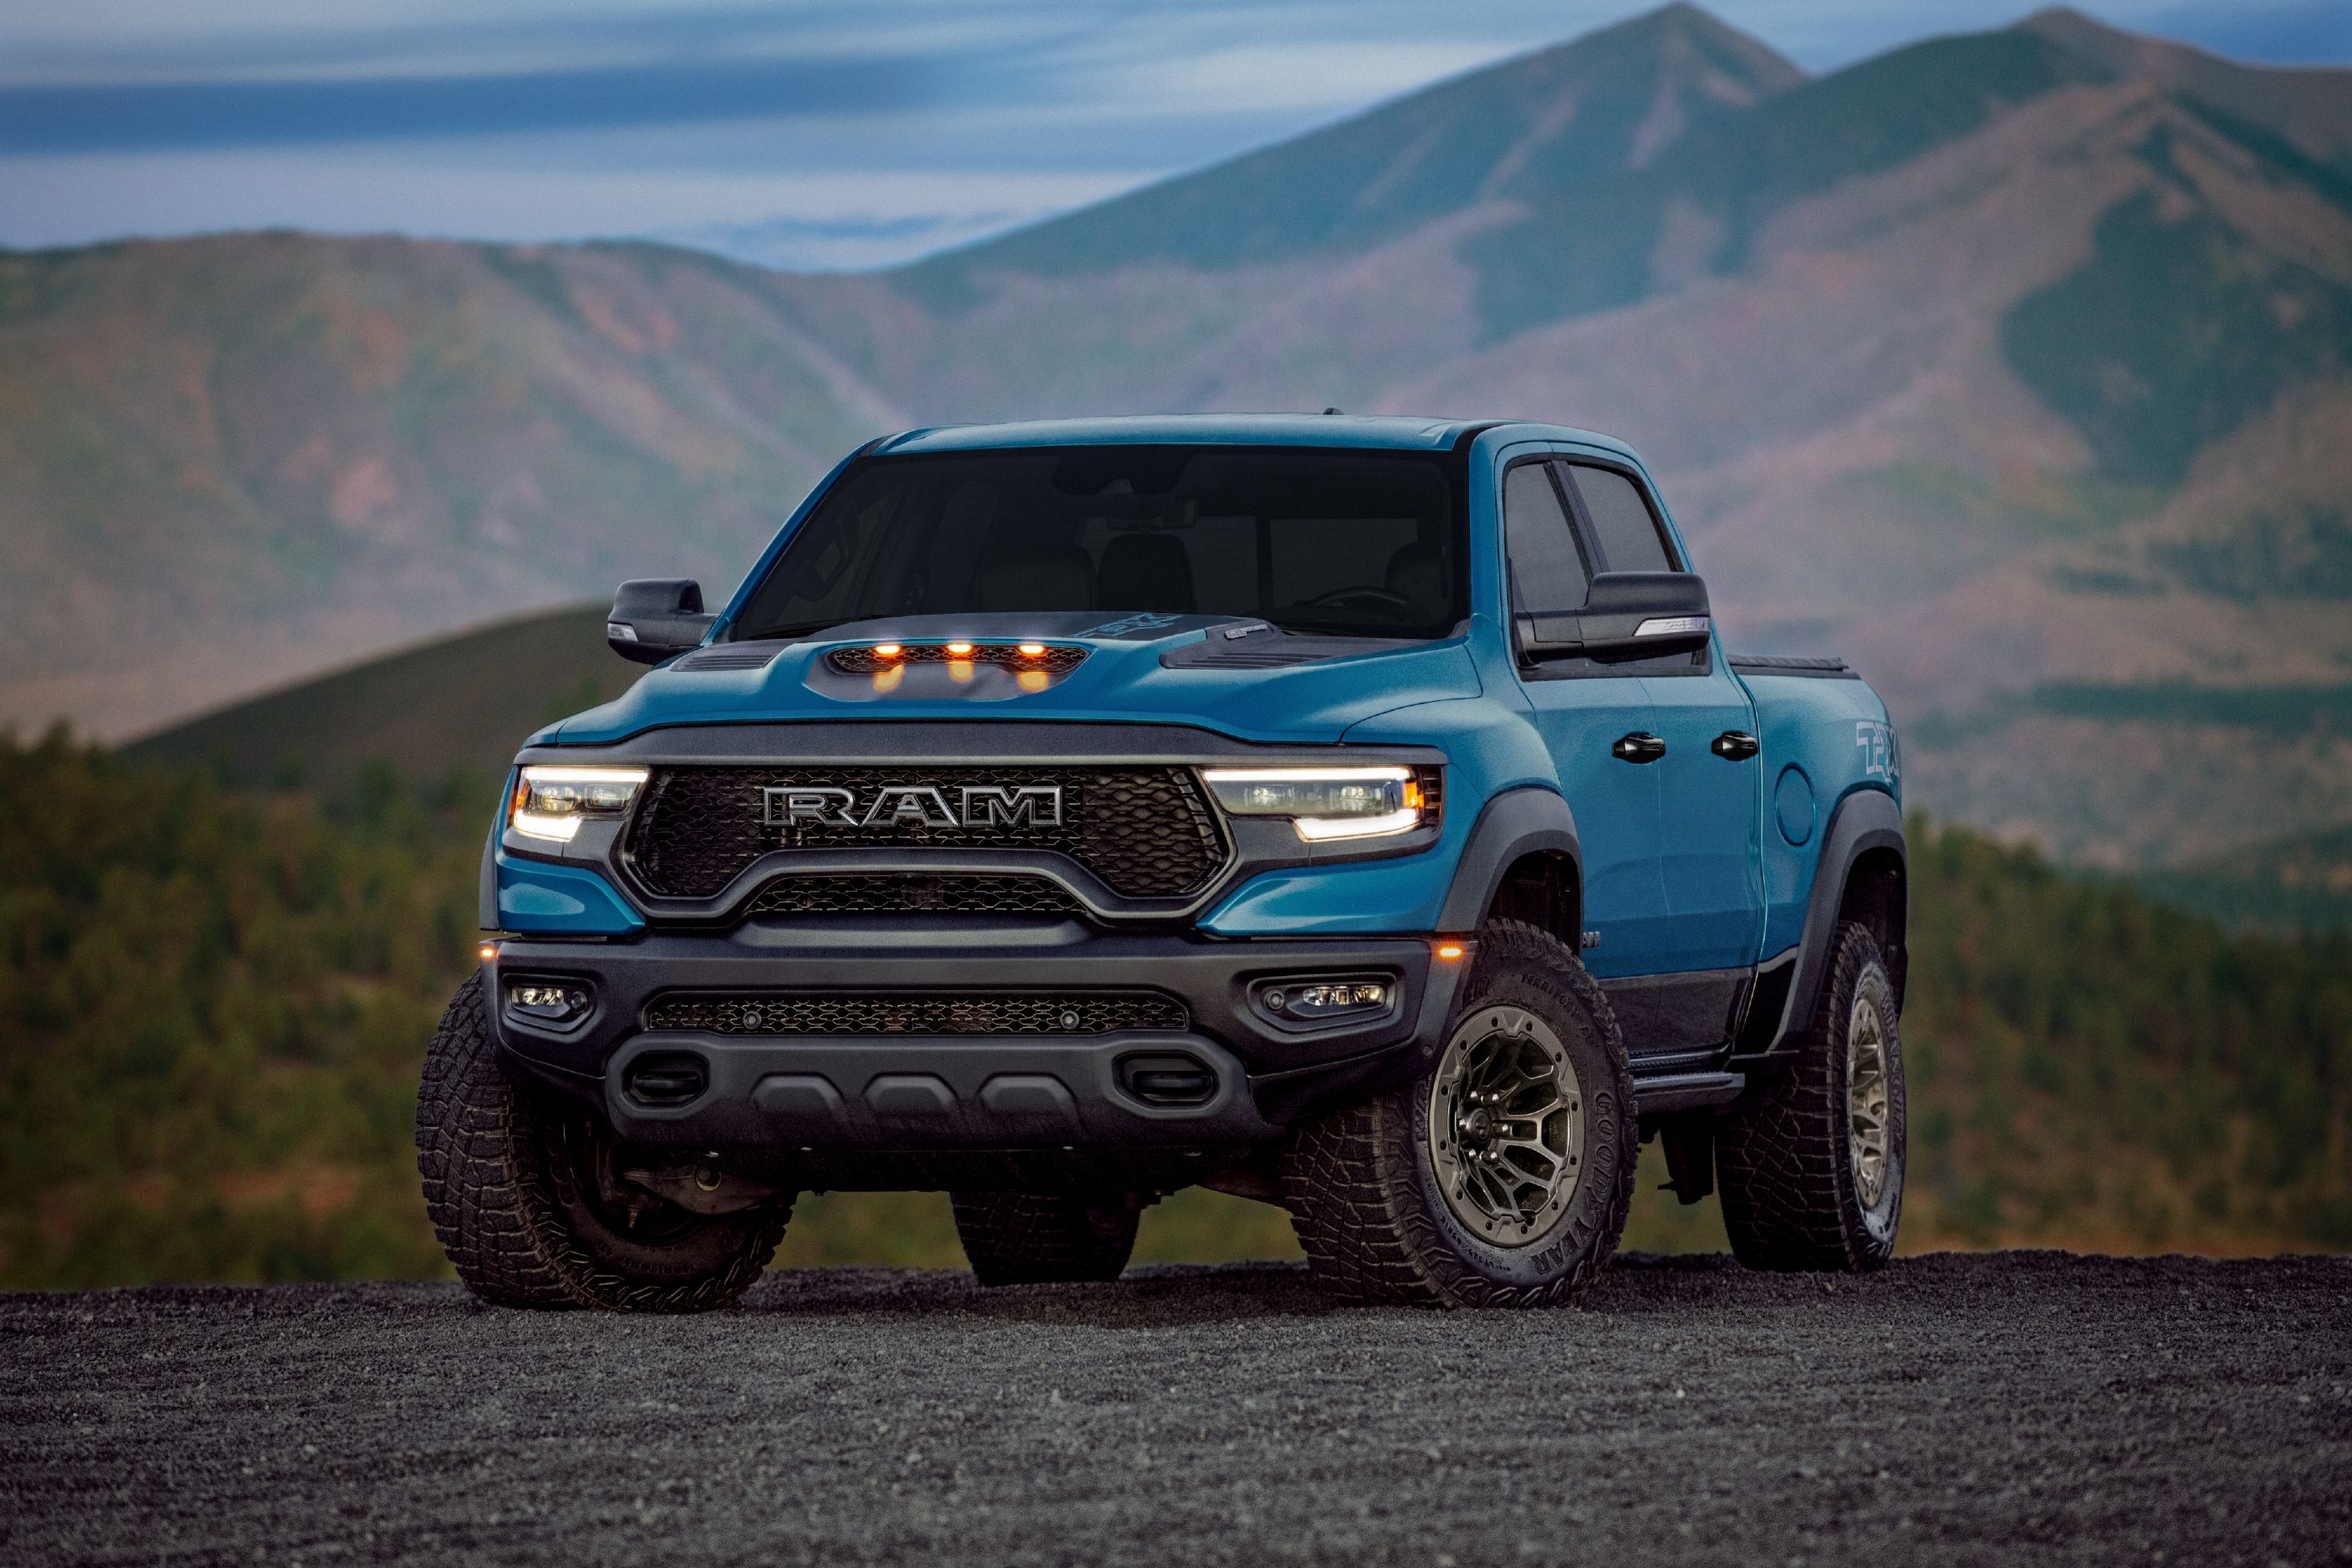 Ram TRX Review: This HP Factory Super Truck Is the New King of the Hill